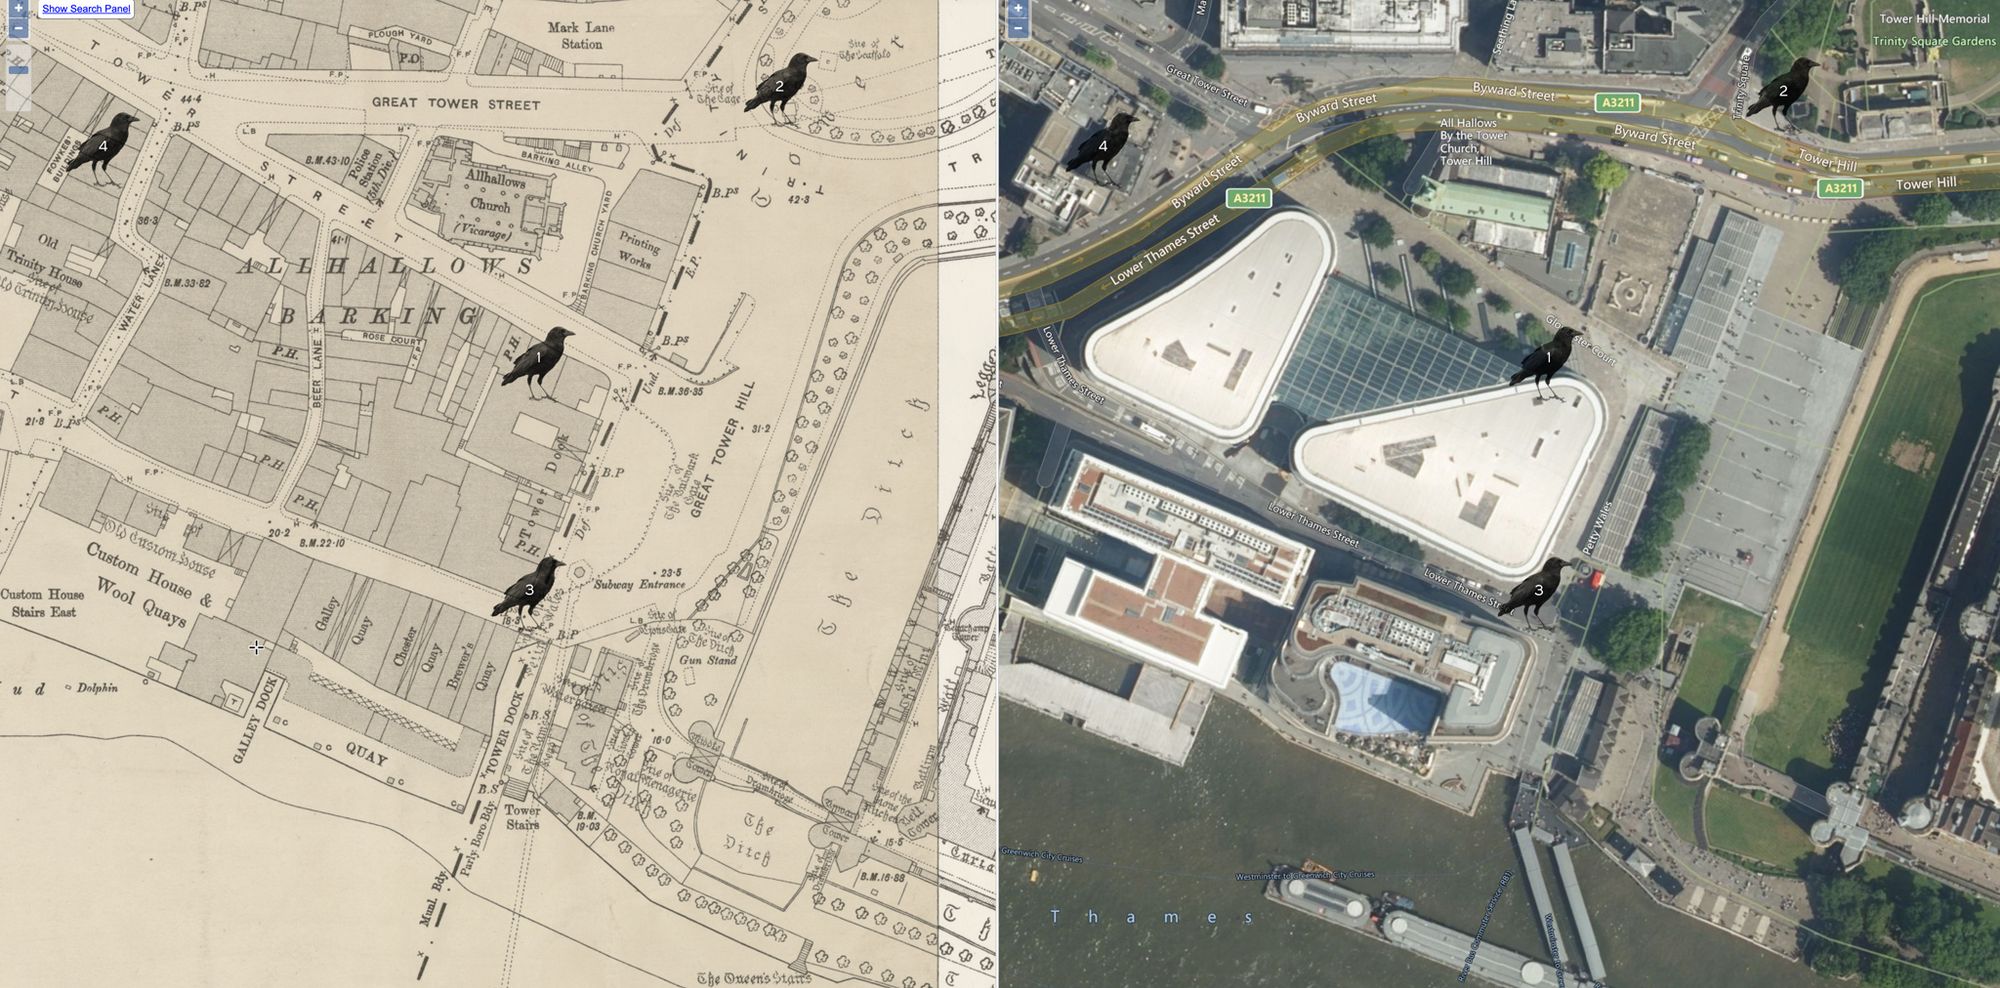 Tower Hill area from 1895 OS Map and current day: National Library of Scotland